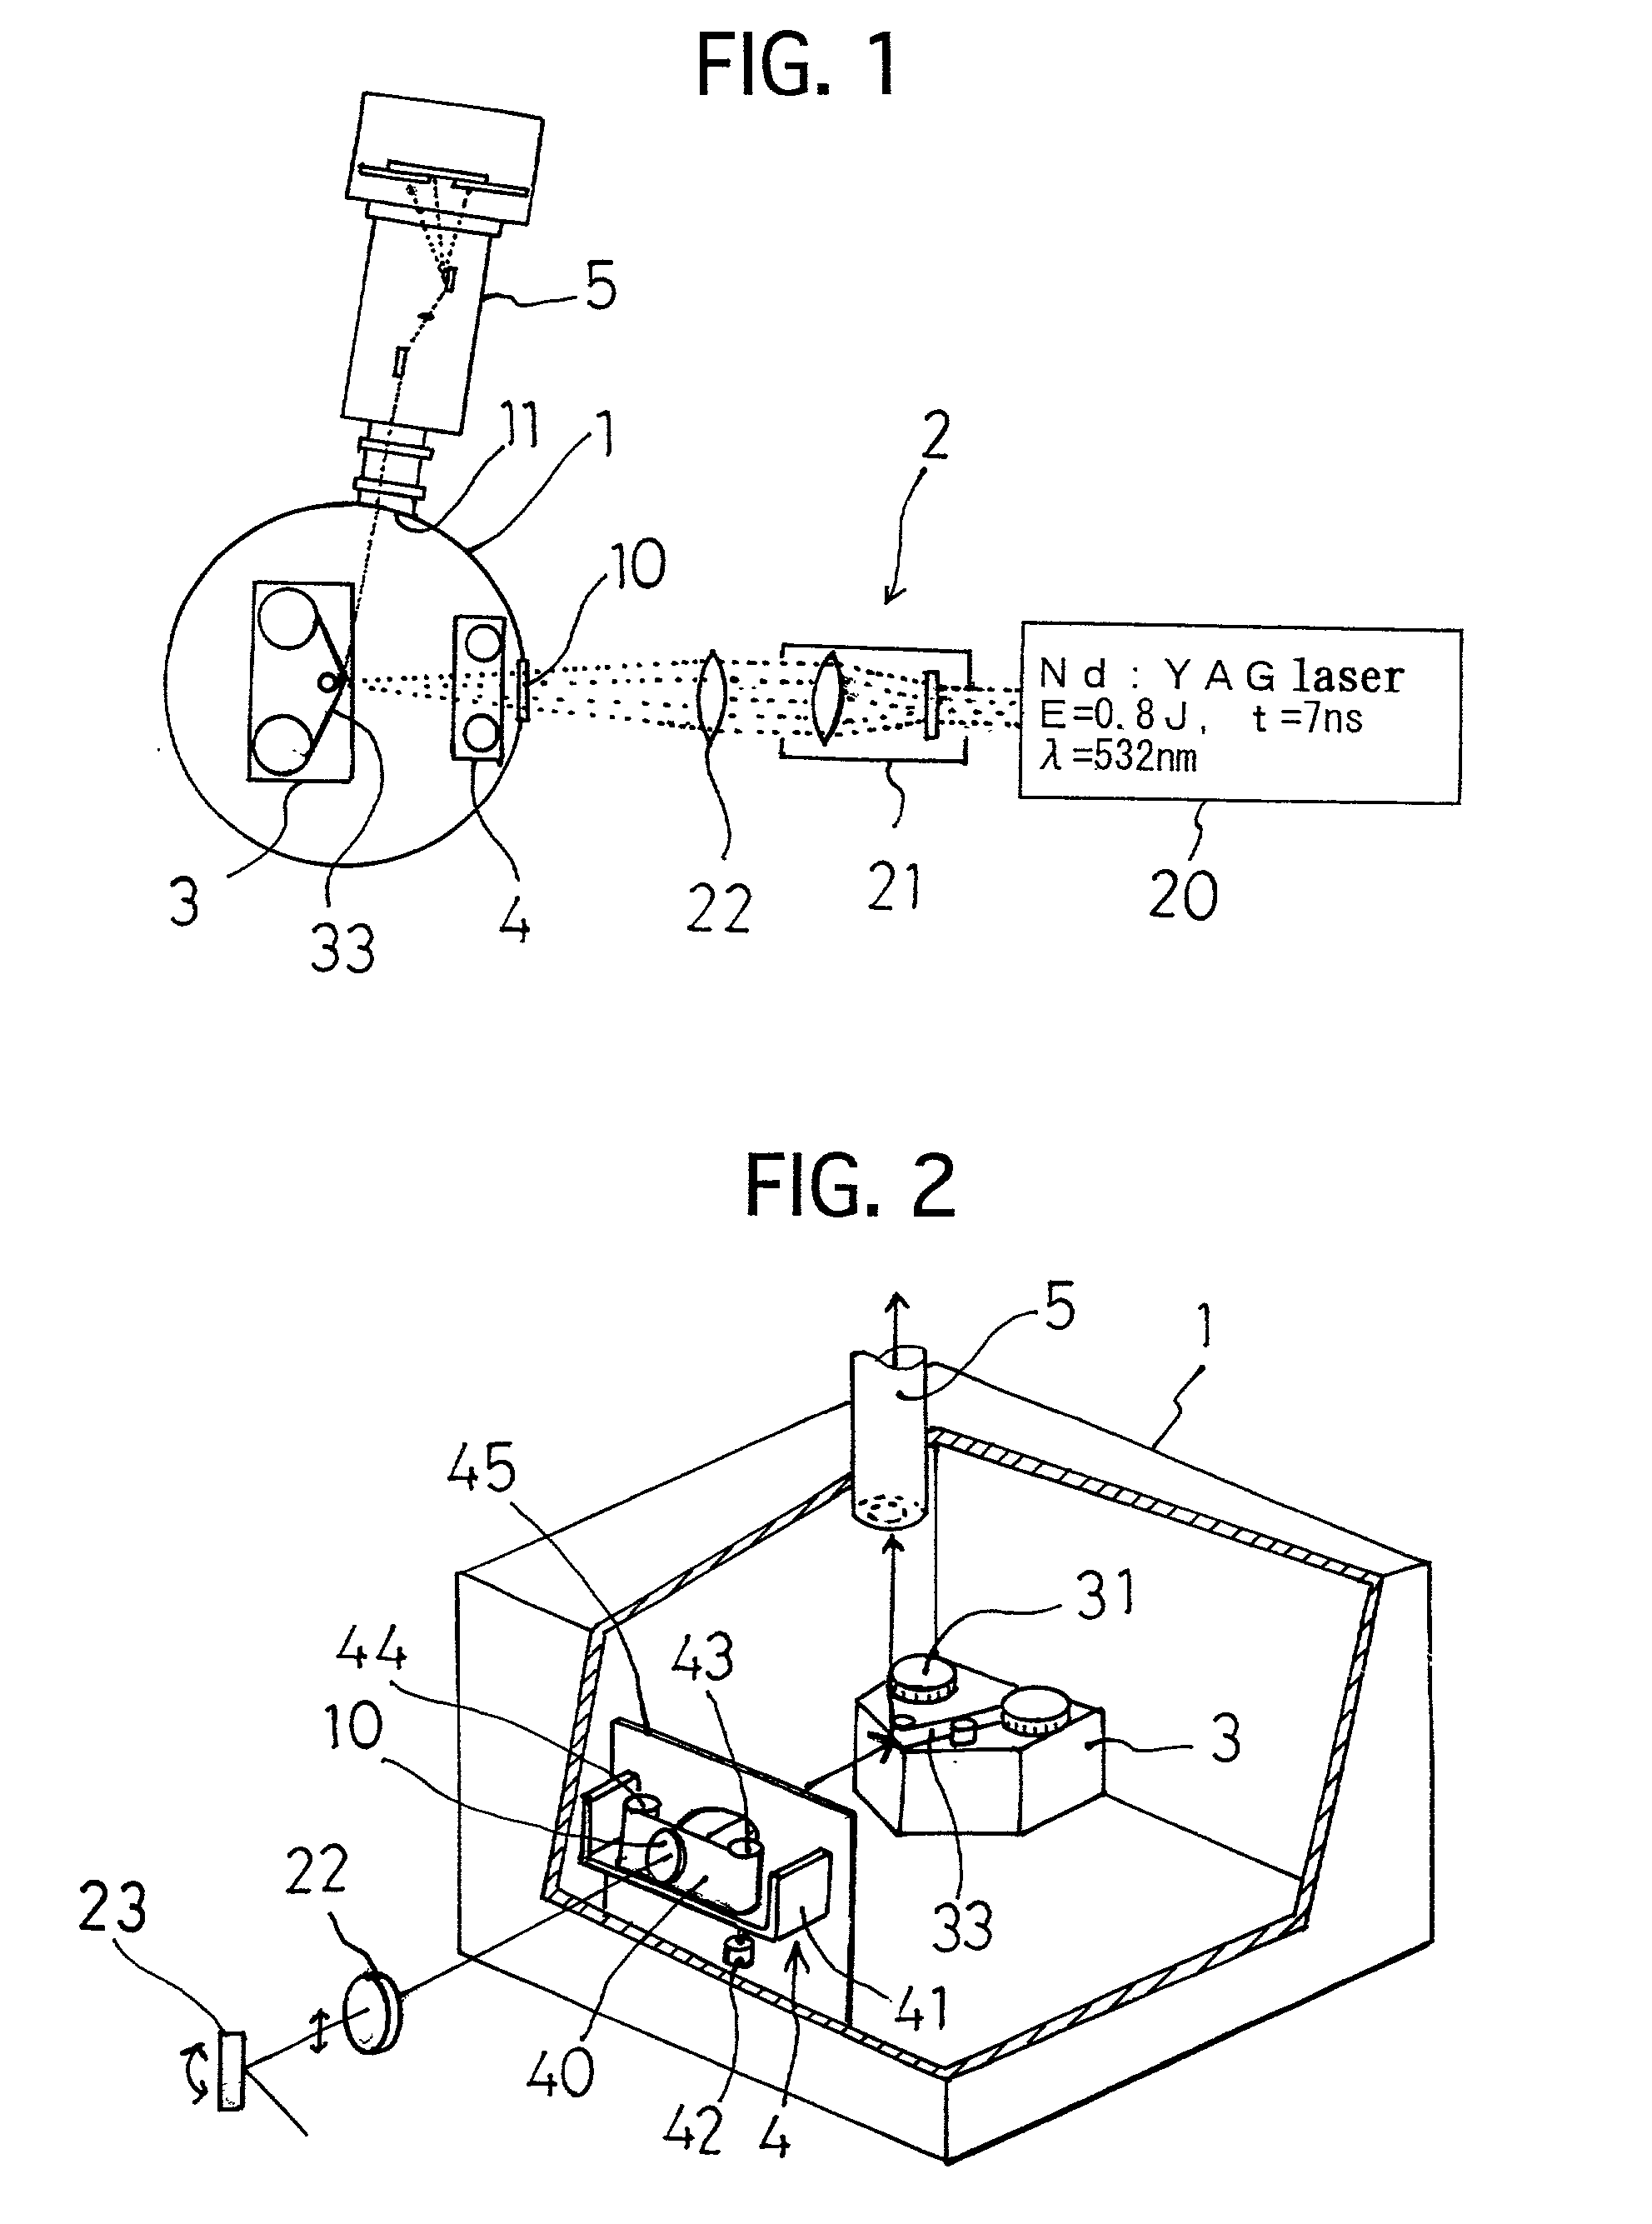 Laser plasma EUV light source apparatus and target used therefor